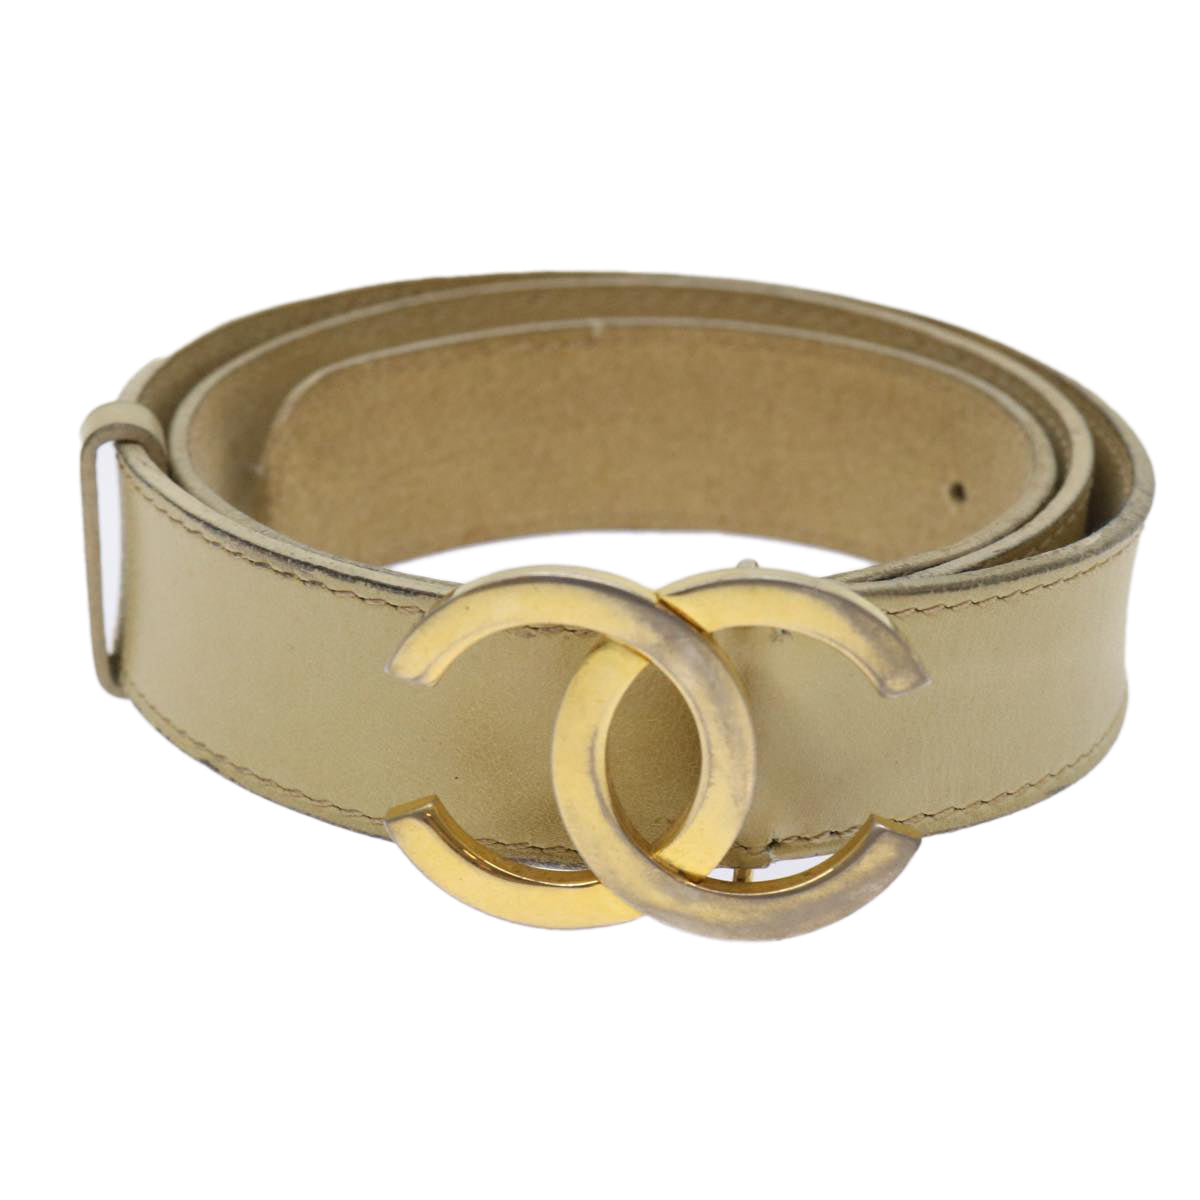 CHANEL COCO Mark Belt Leather 33.1"" Beige CC Auth am4714